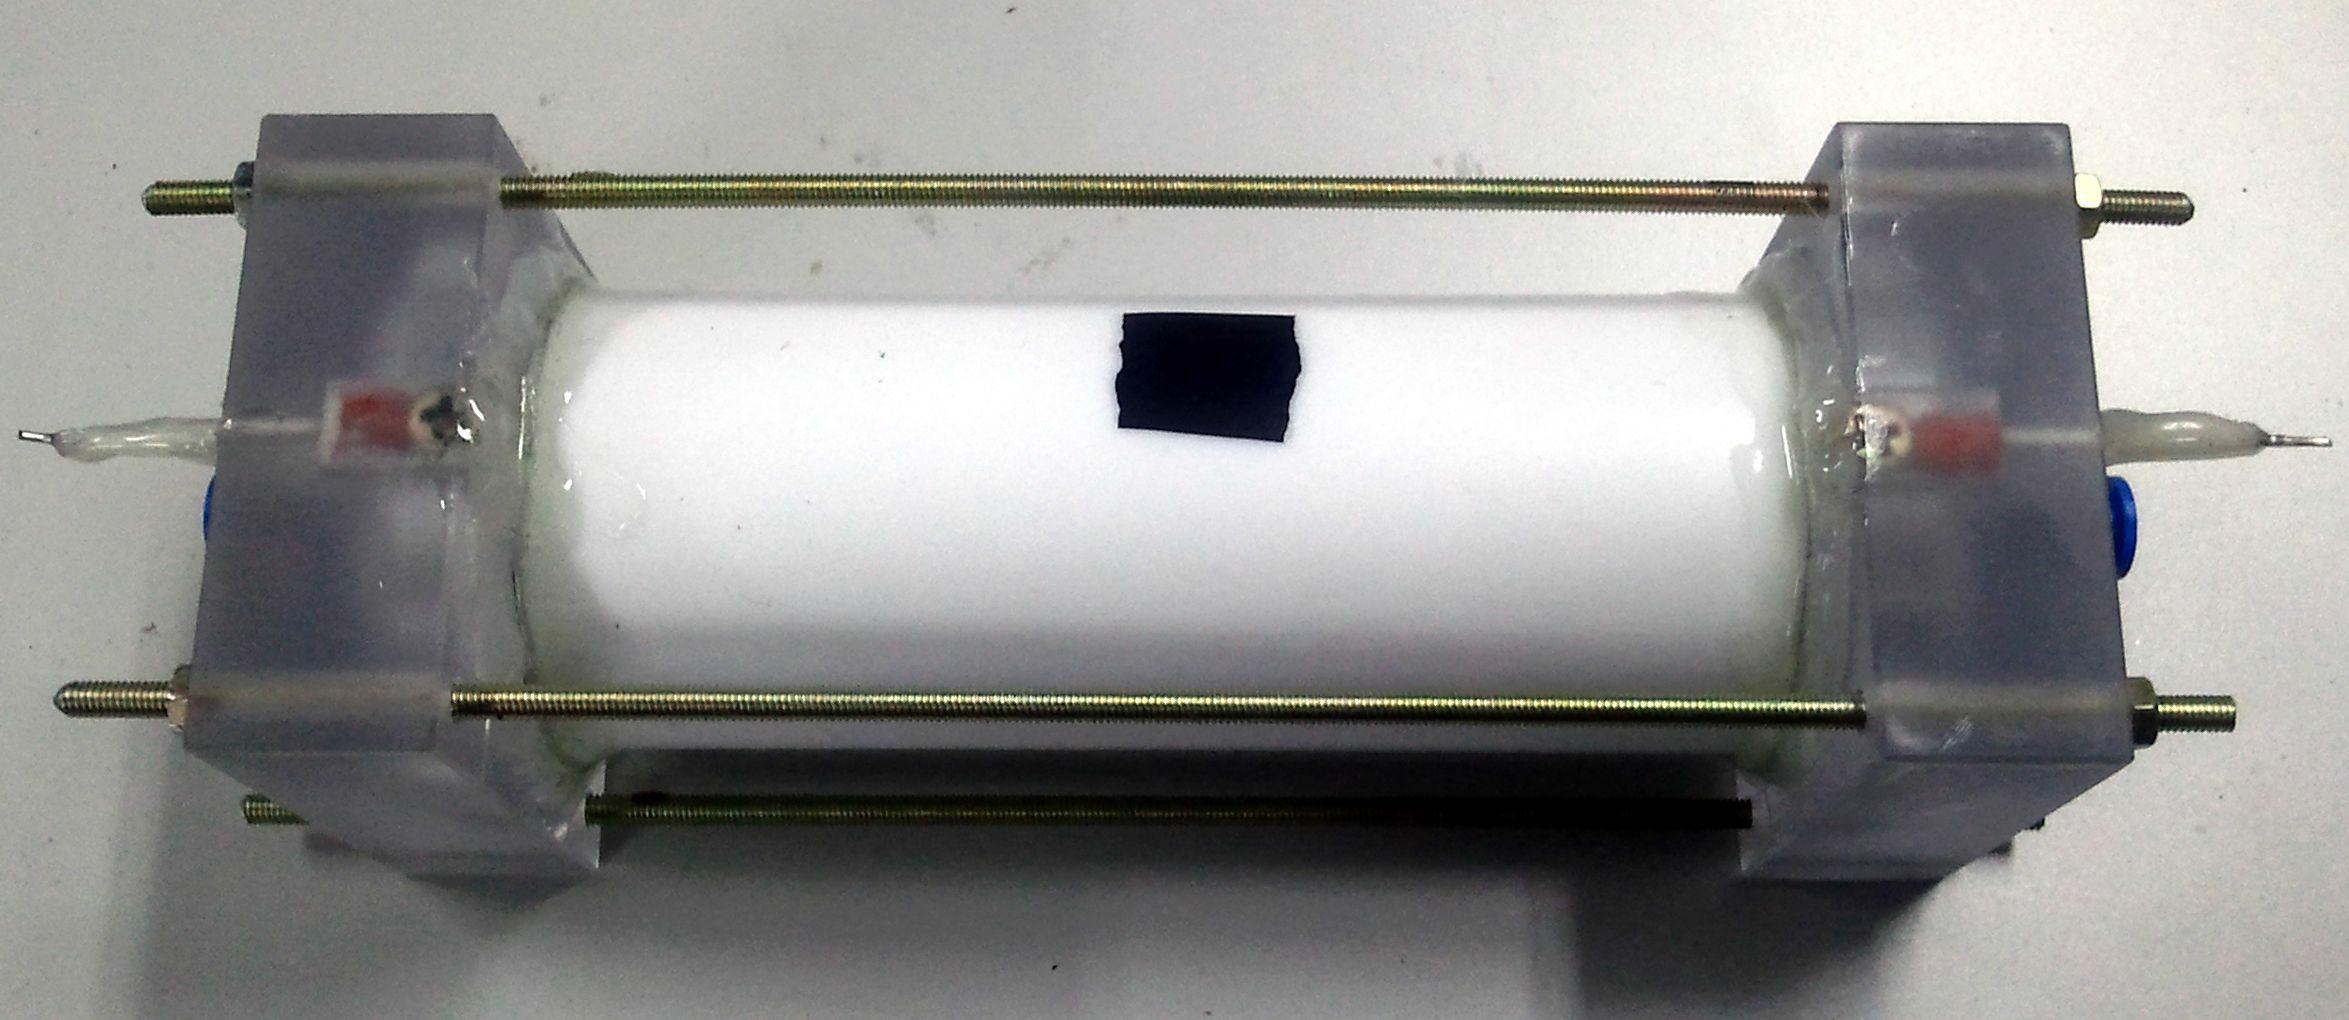 1st CO2 adsorption module assembly picture using carbon fiber